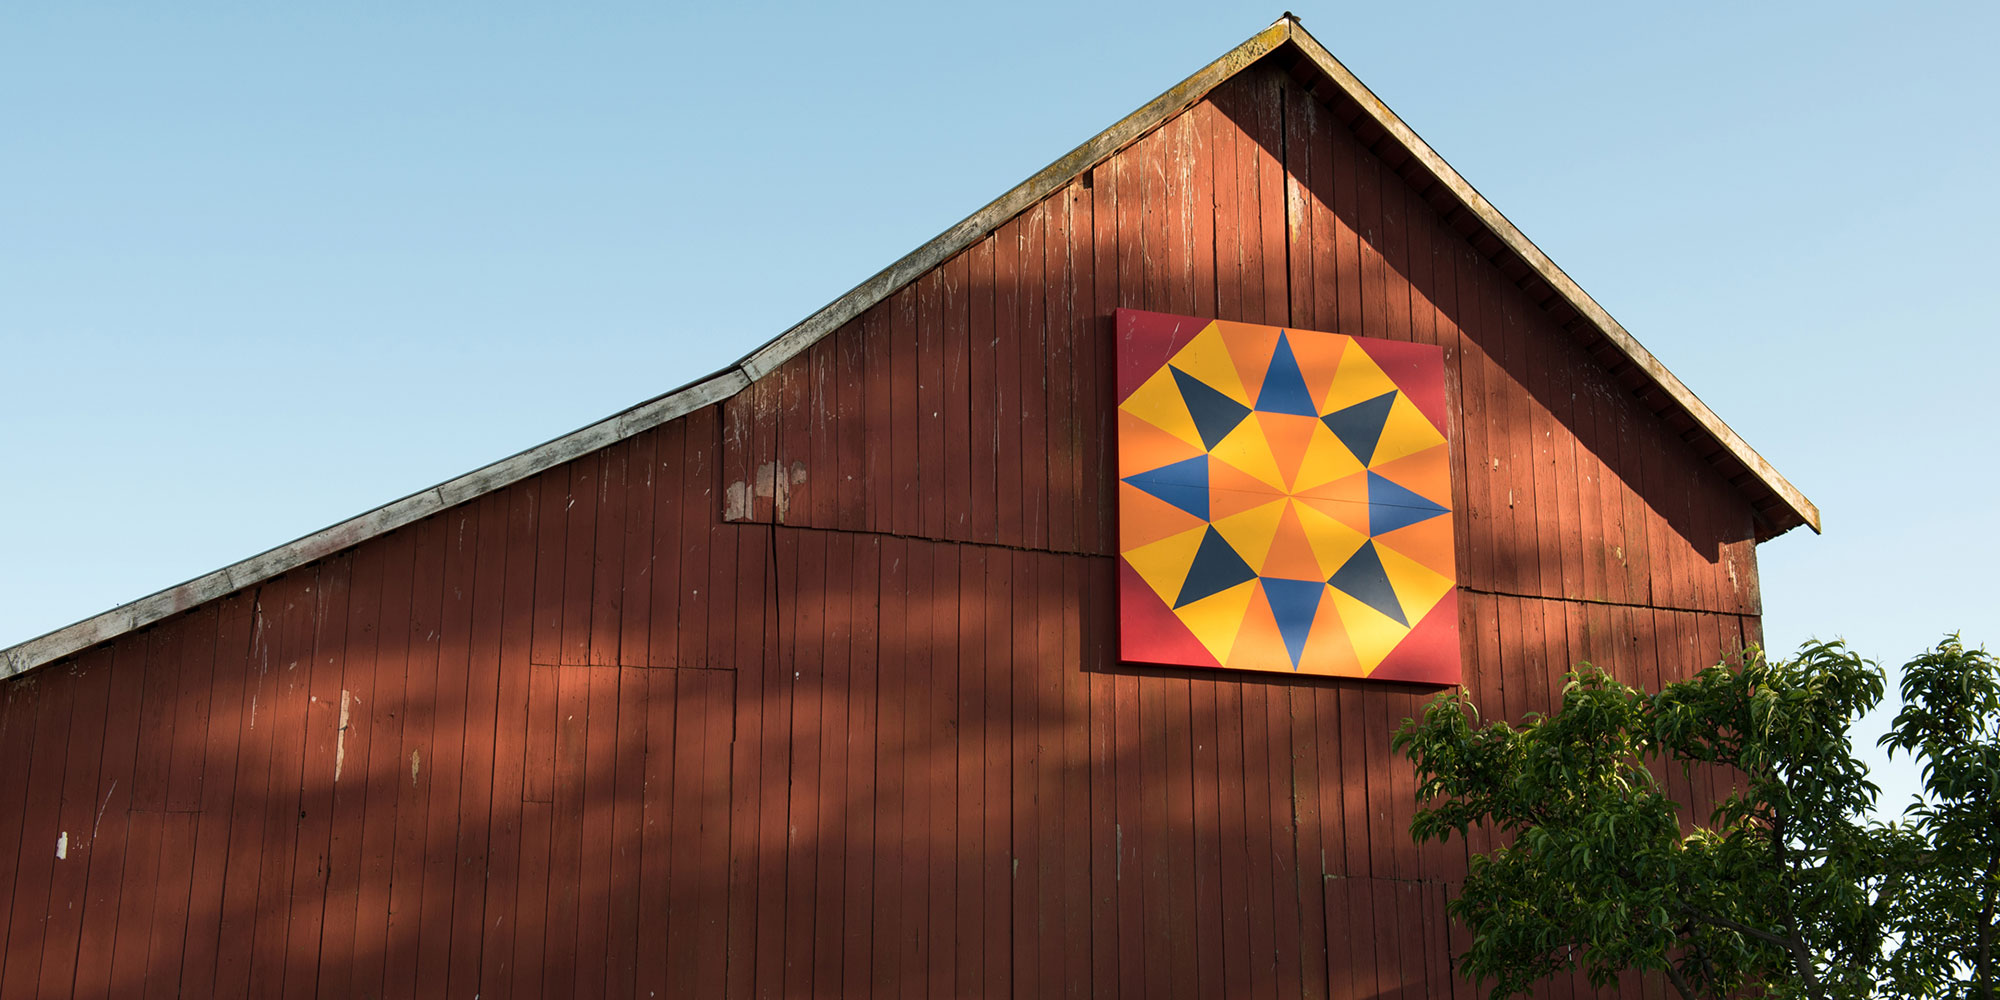 red barn with quilt tile